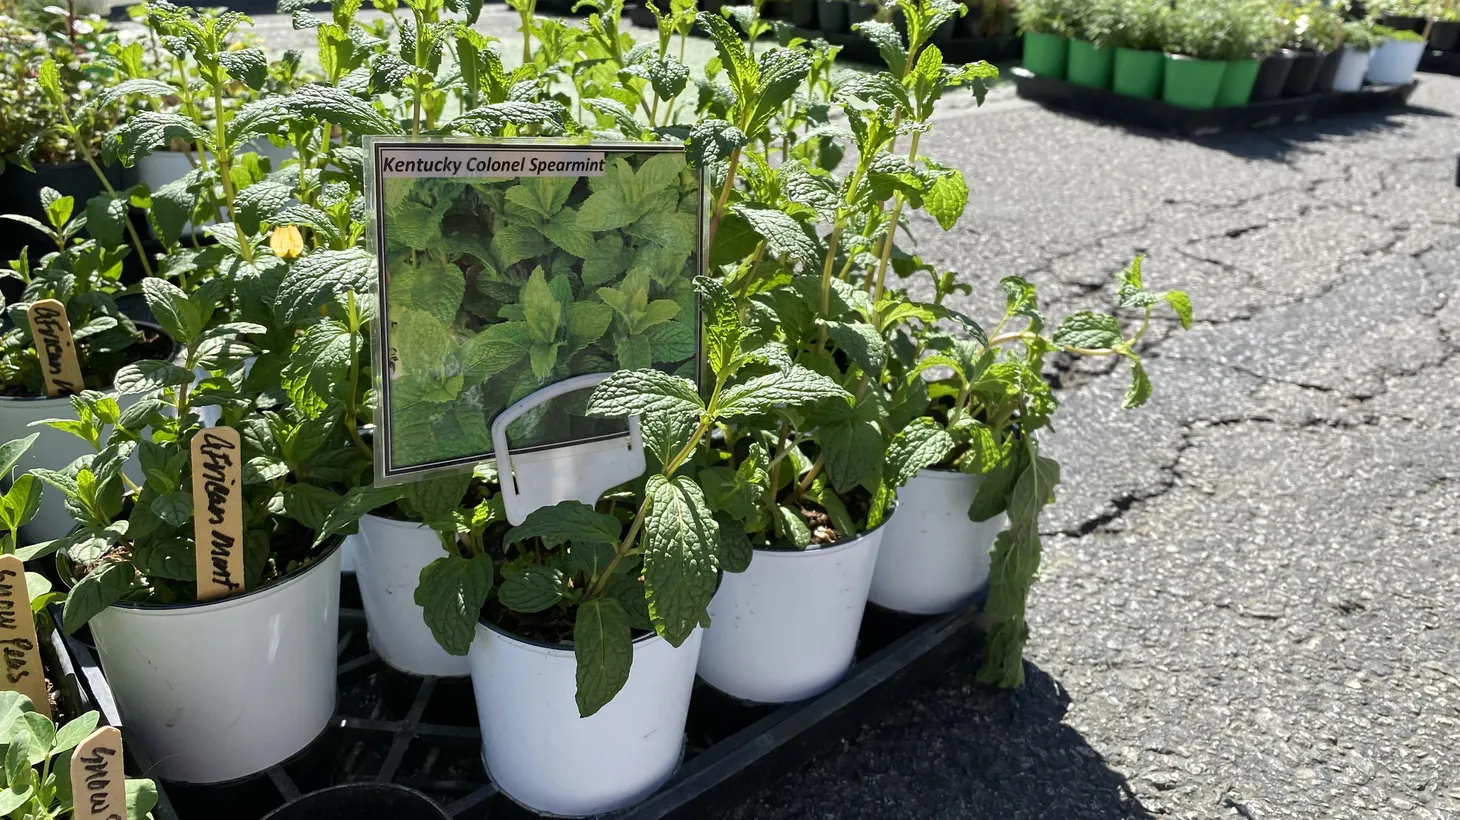 Logan Williams of Logan’s Garden is bringing mint to the farmer’s market including Persian, Moroccan, African varieties, and his father’s favorite — strawberry mint.